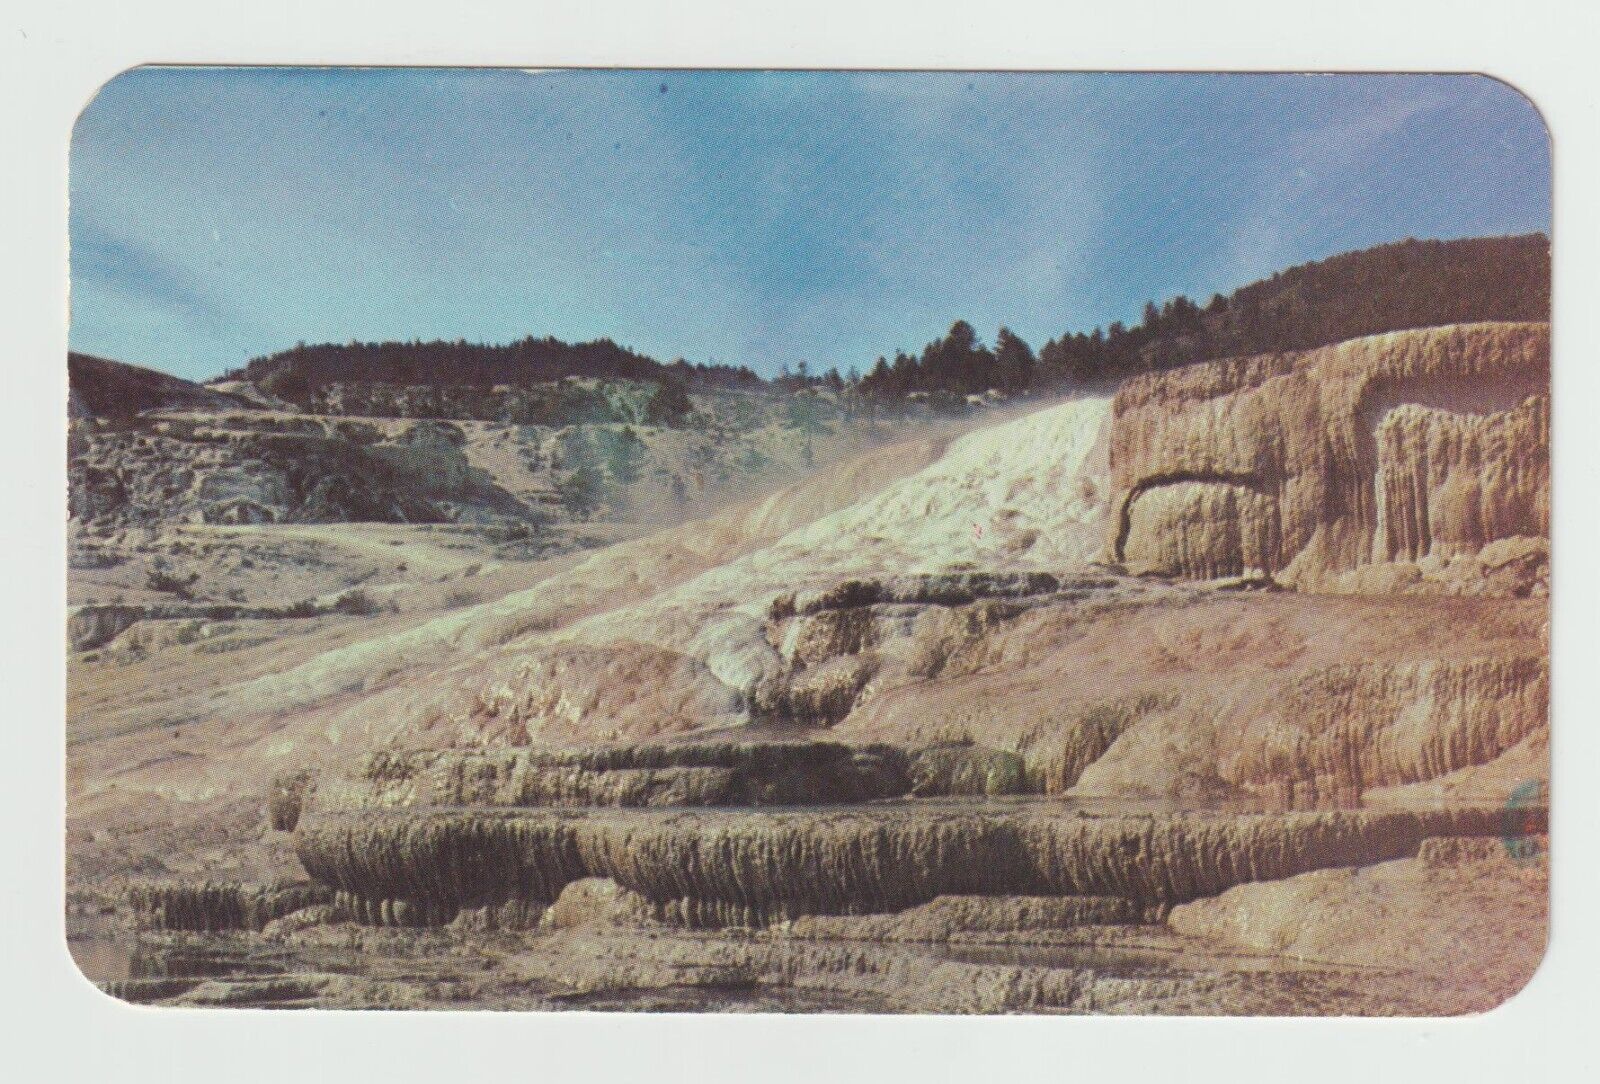 Terraces at Mammoth Hot Springs Yellow Stone National Park Chrome Postcard